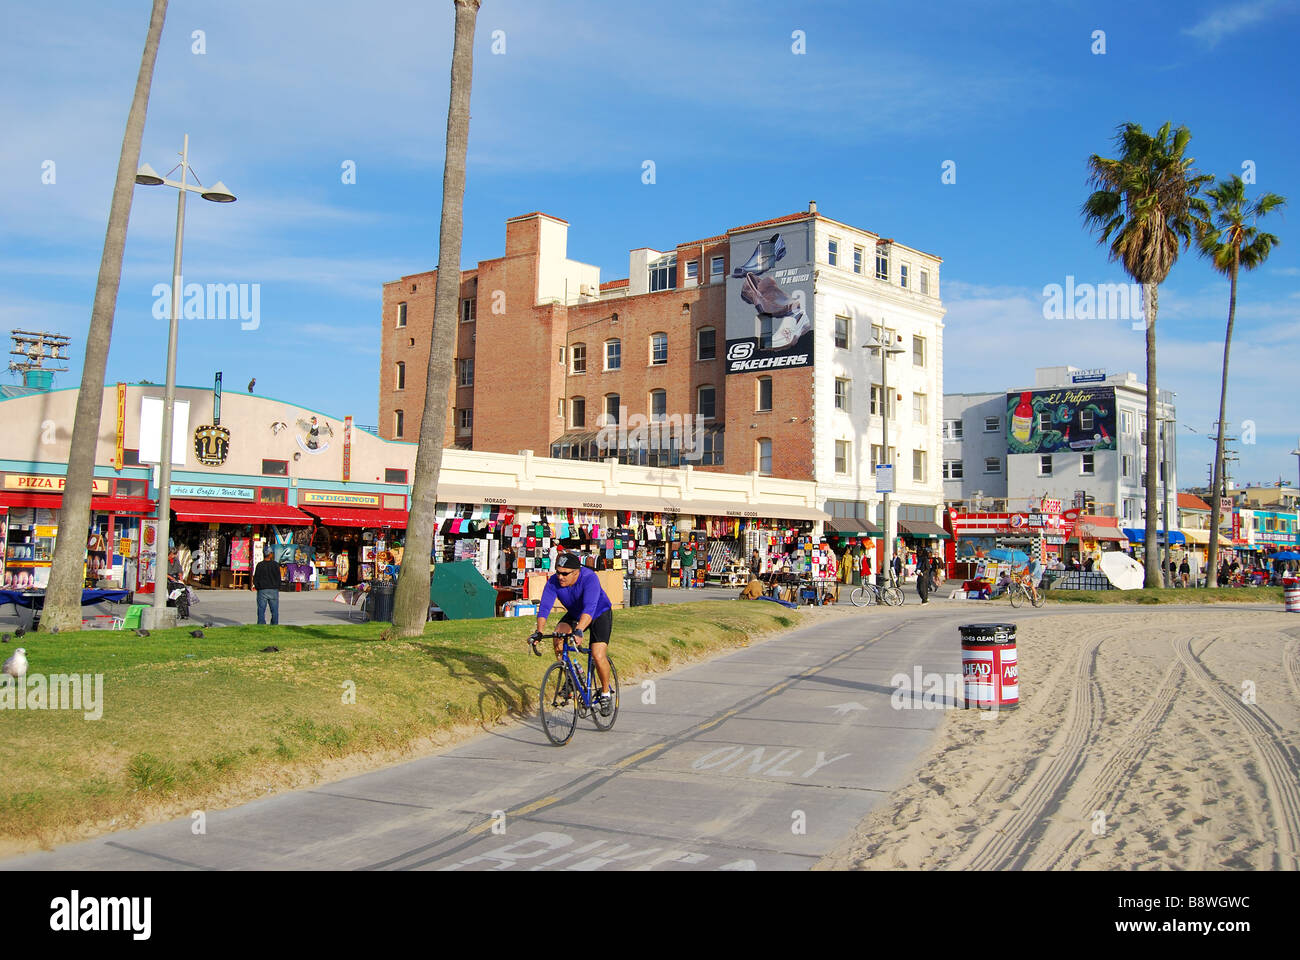 Cycle path, Ocean Front Walk, Venice Beach, Los Angeles, California, United States of America Stock Photo